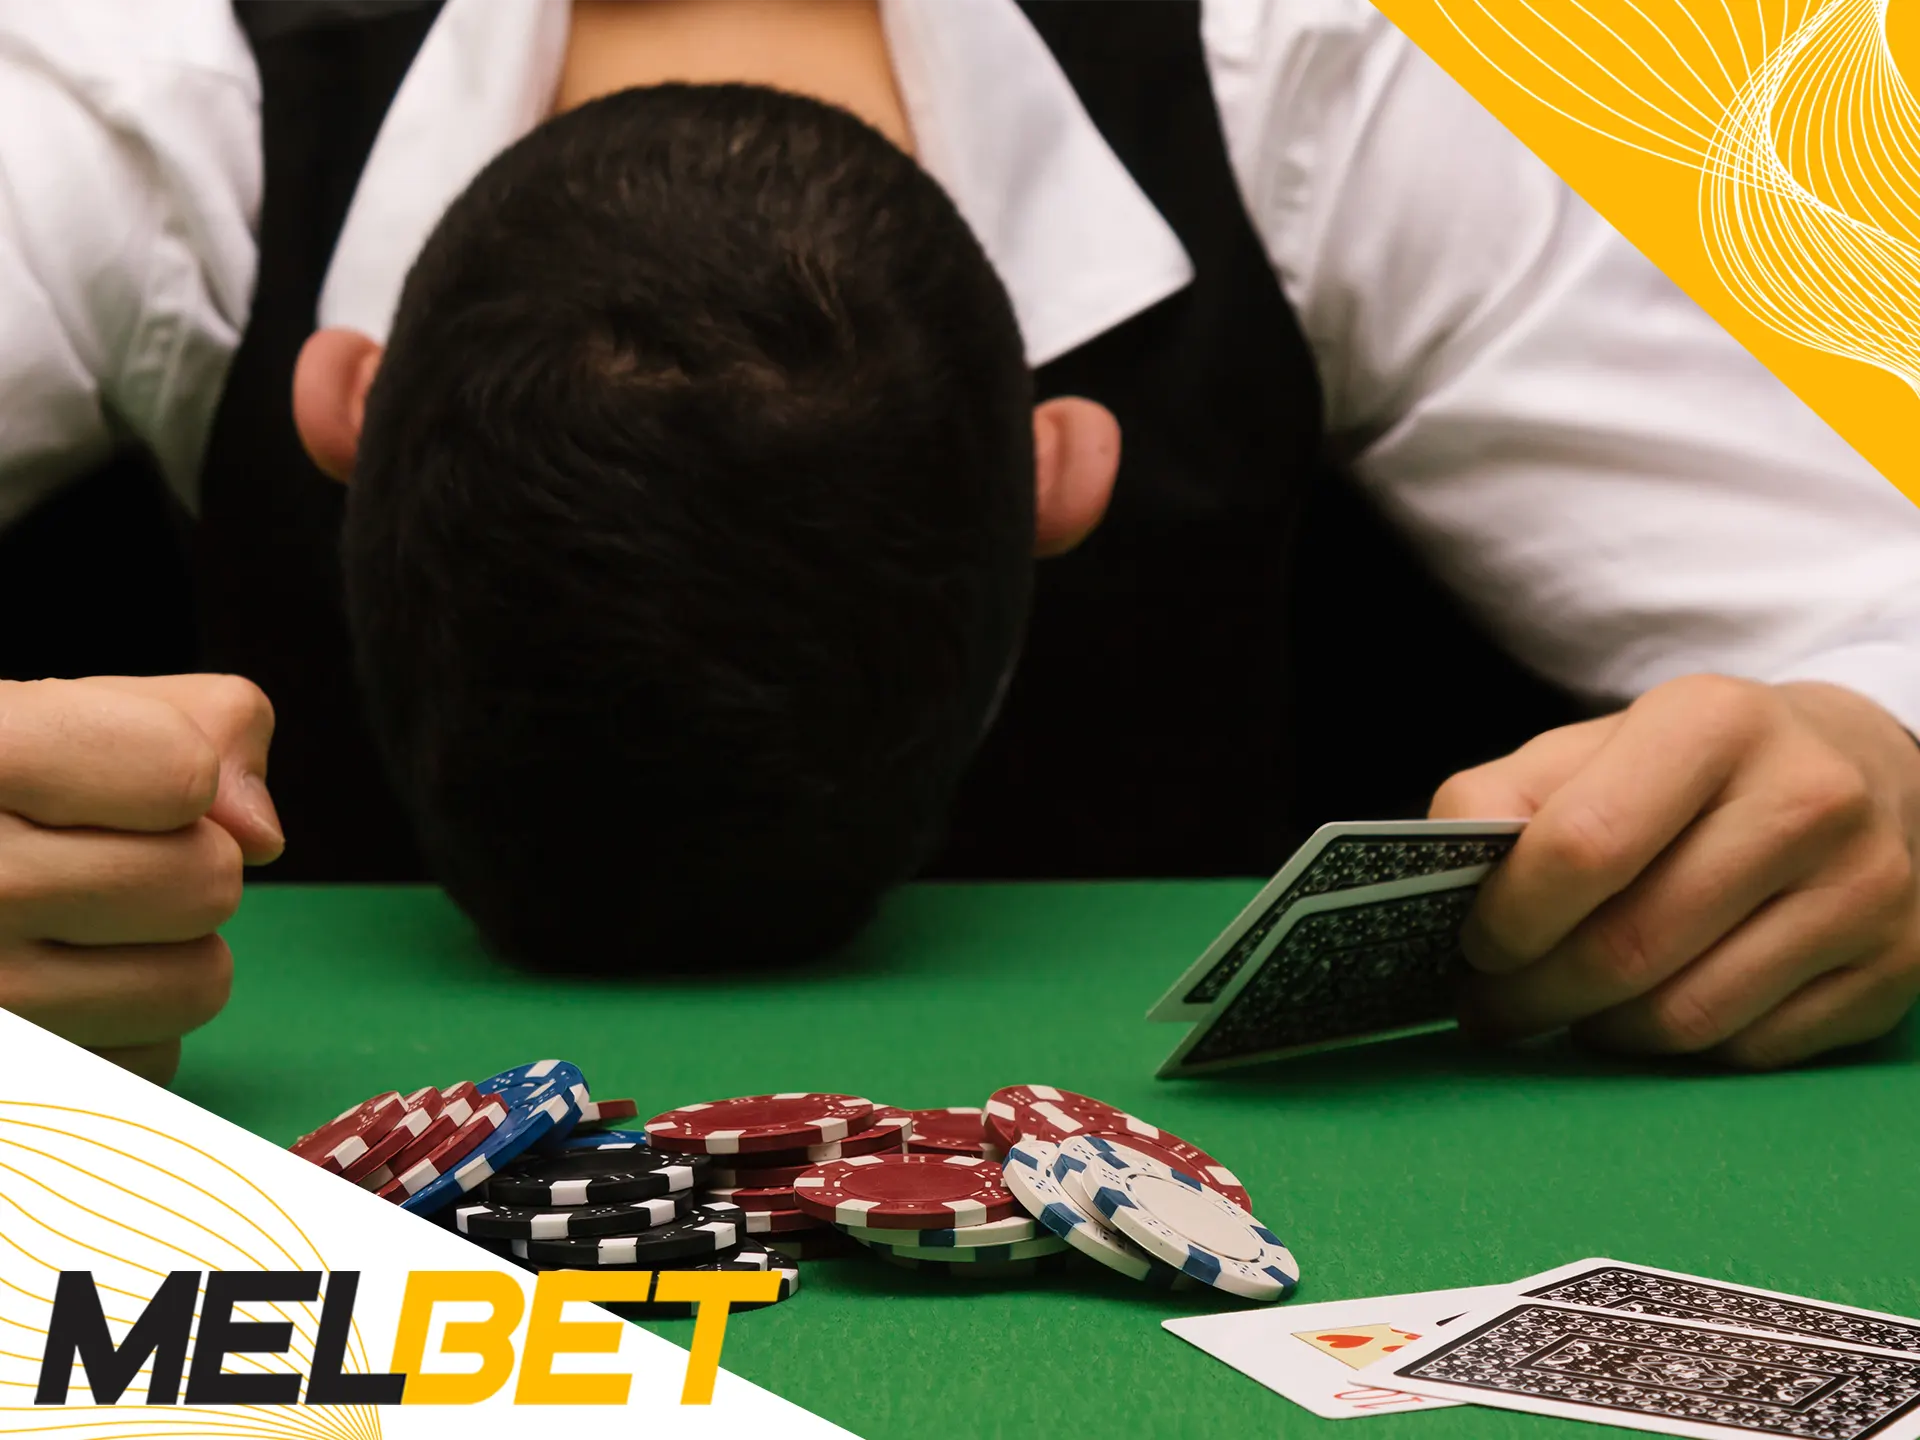 Bet gambling addiction by following our tips.